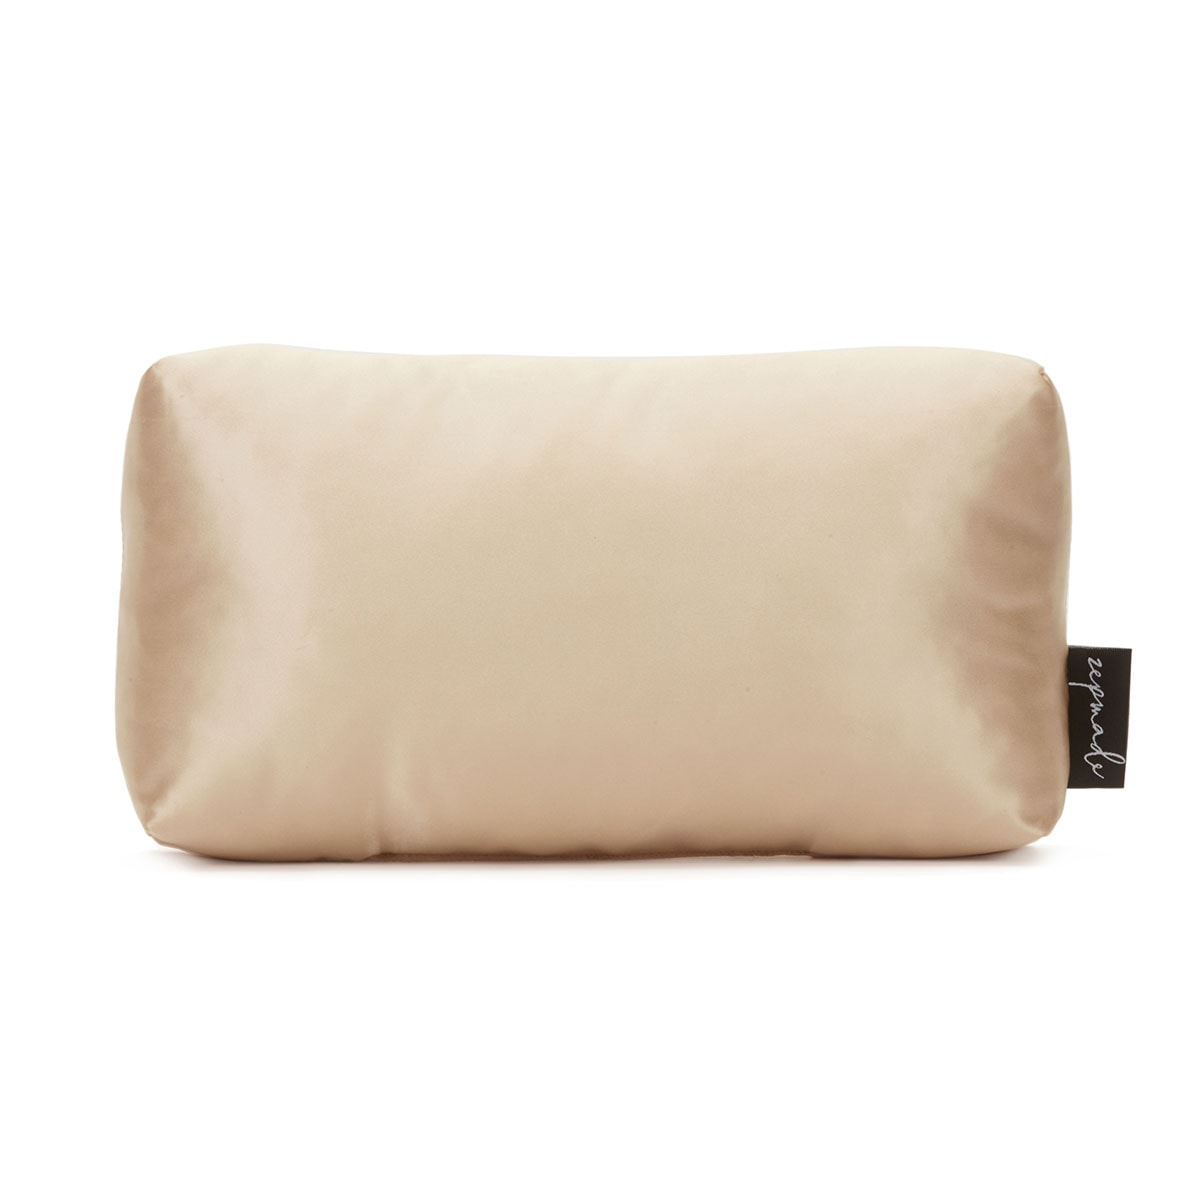 Bag-a-Vie Purse Shaping Pillow For / Fits Chanel Maxi Purse Pillow - Medi